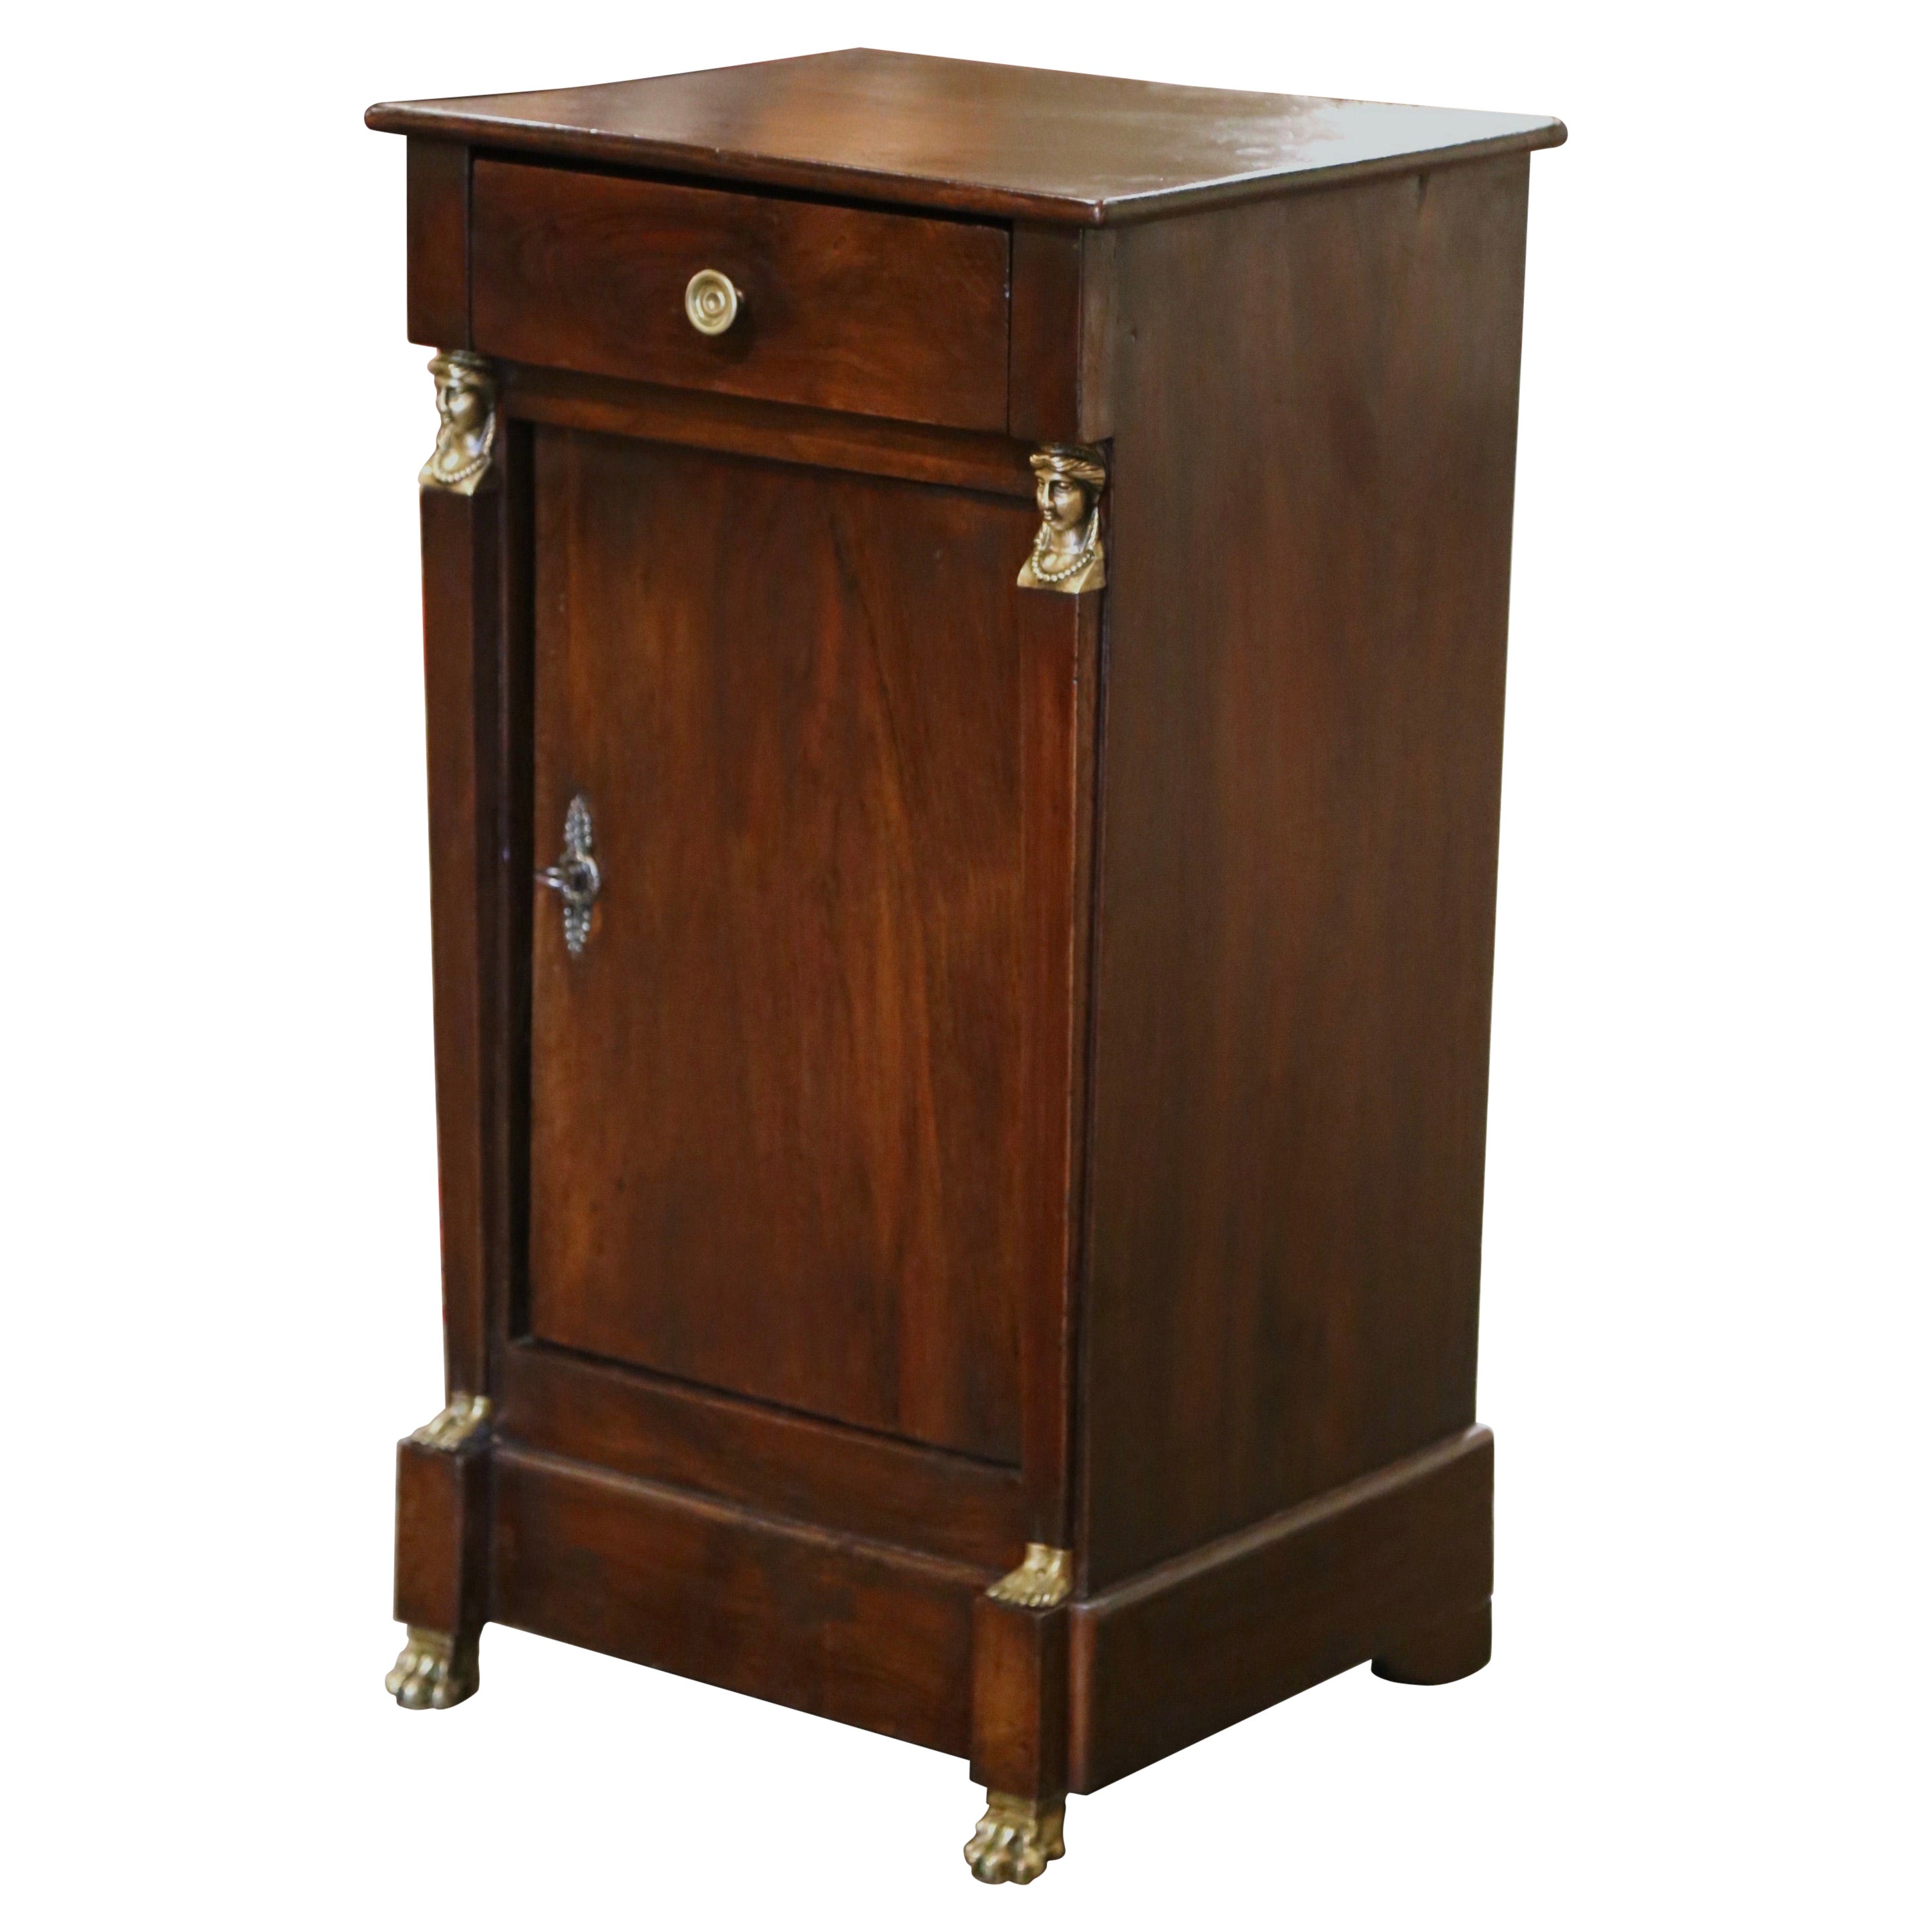 19th Century French Empire Mahogany Nightstand Bedside Table with Bronze Mounts